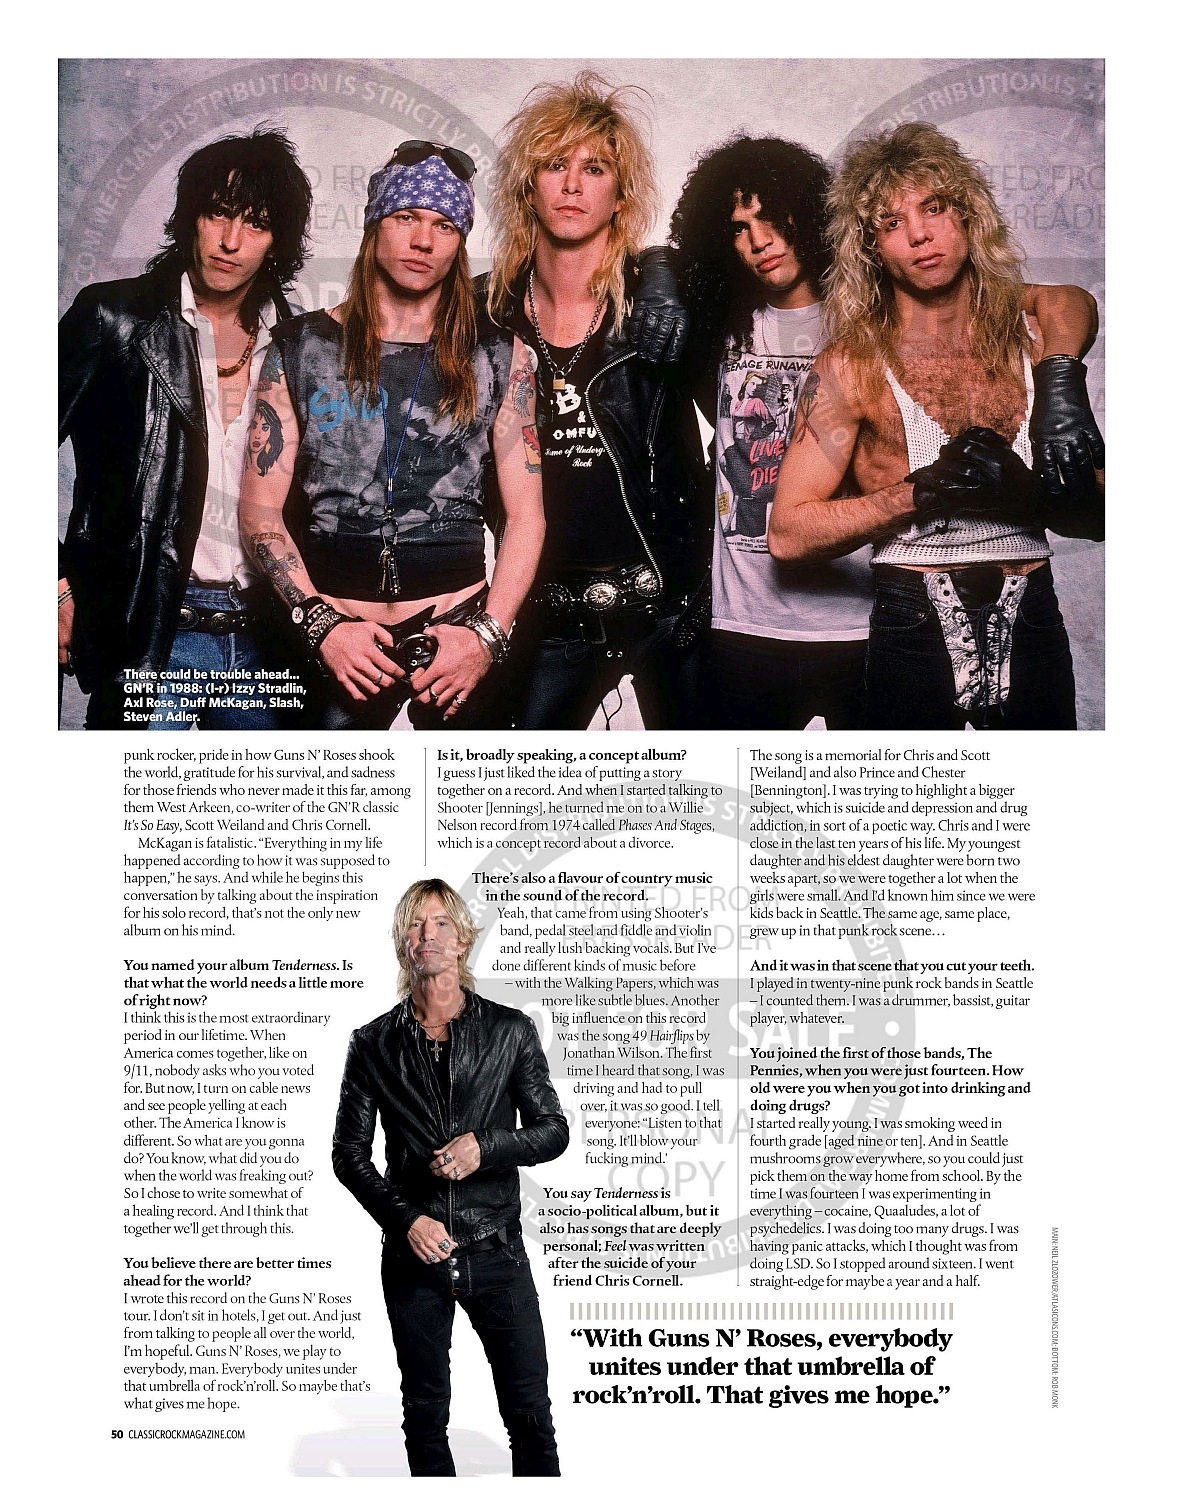 2019.05.DD - Classic Rock - Duff McKagan: We wanted Izzy to be part of Guns N’ Roses reunion 2019_041